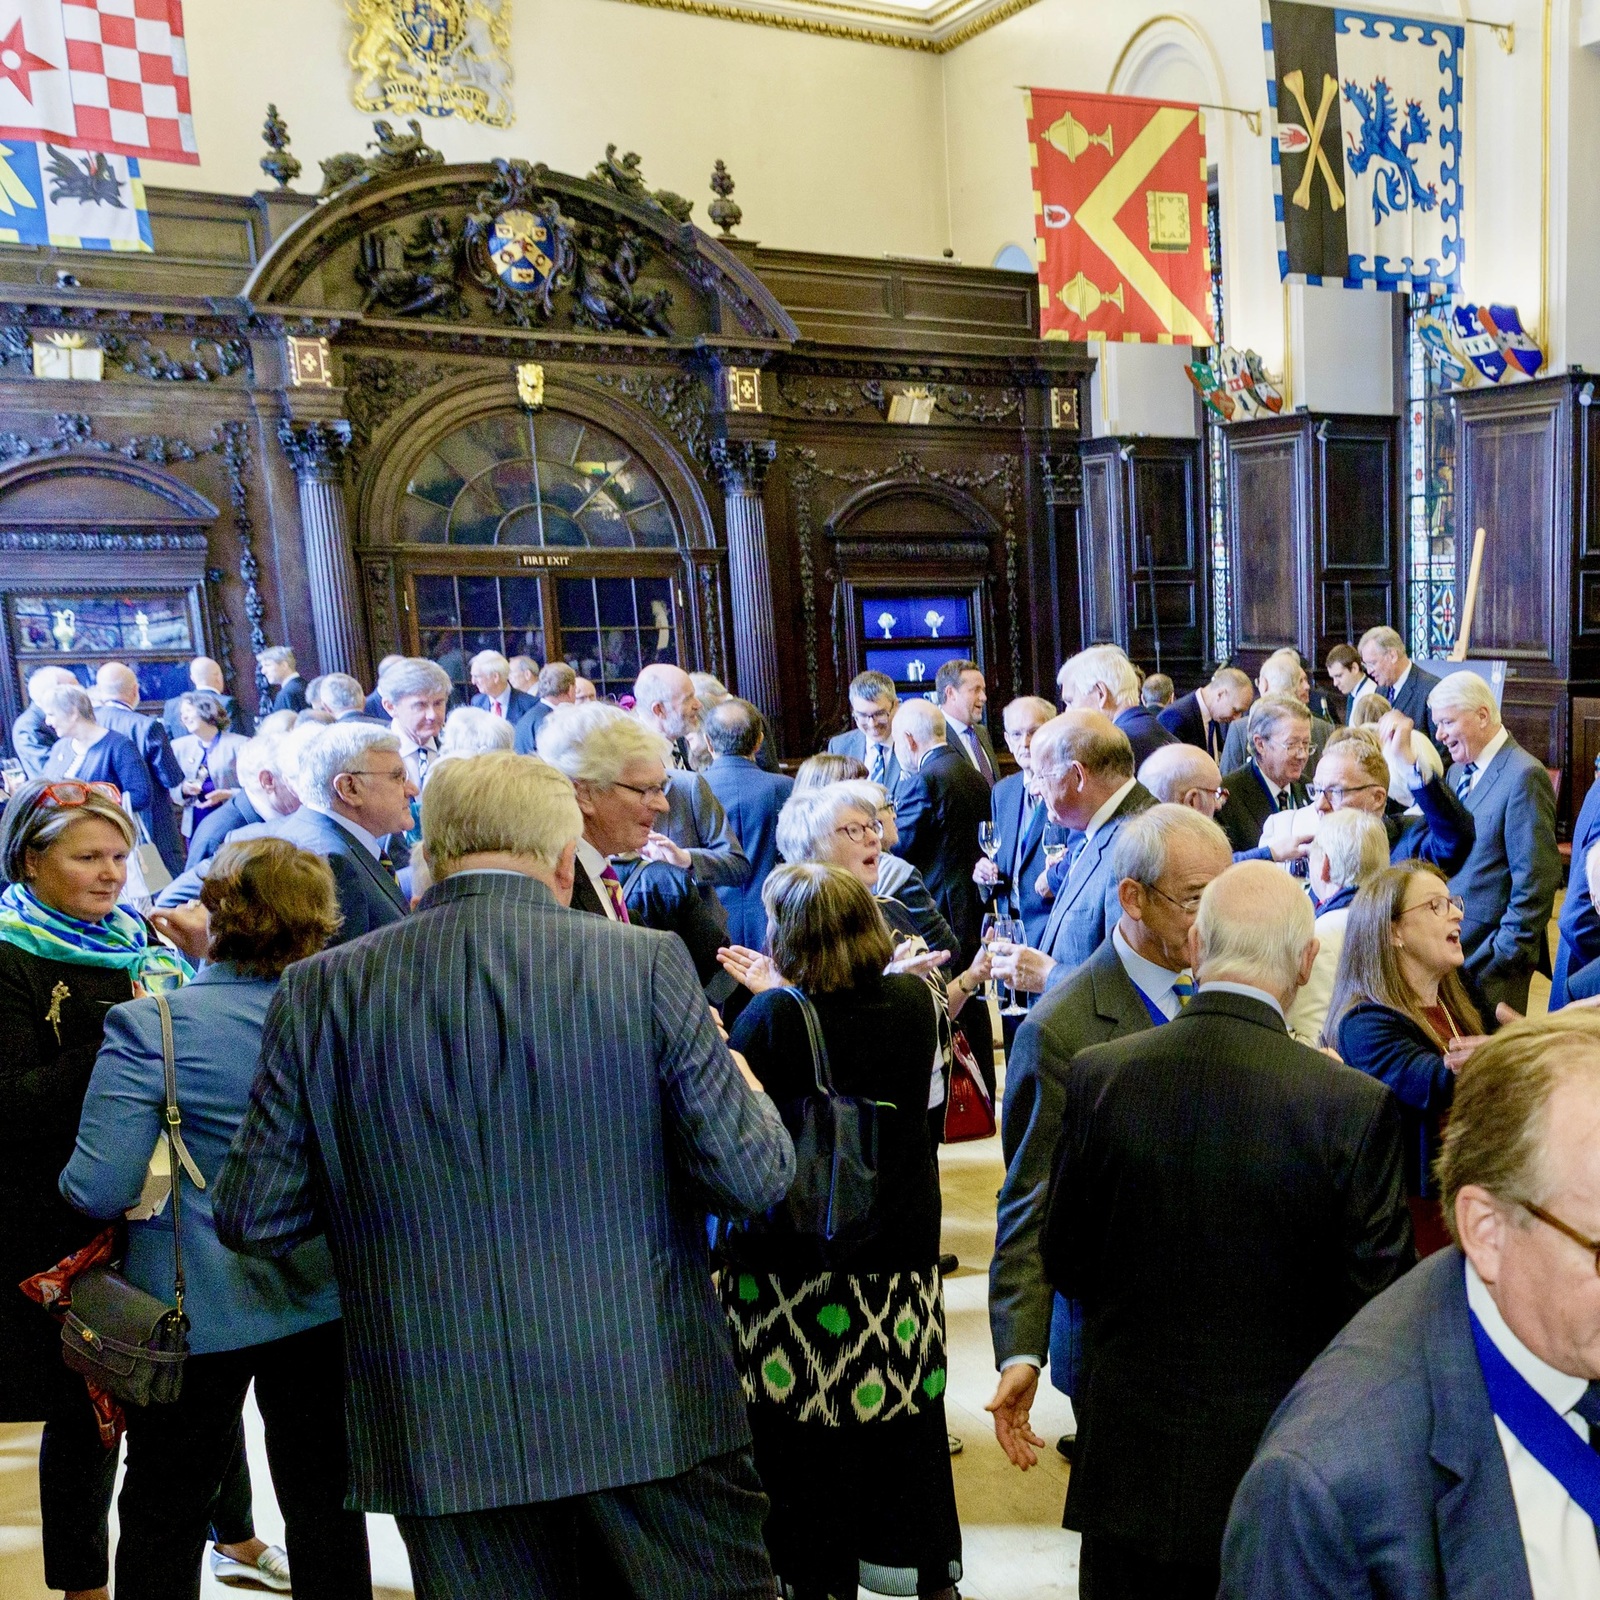 20 Sept 22 - A truly memorable and enjoyable time today with friends and supporters at Stationers’ Hall where I was presented with my Shrieval Chain and badge